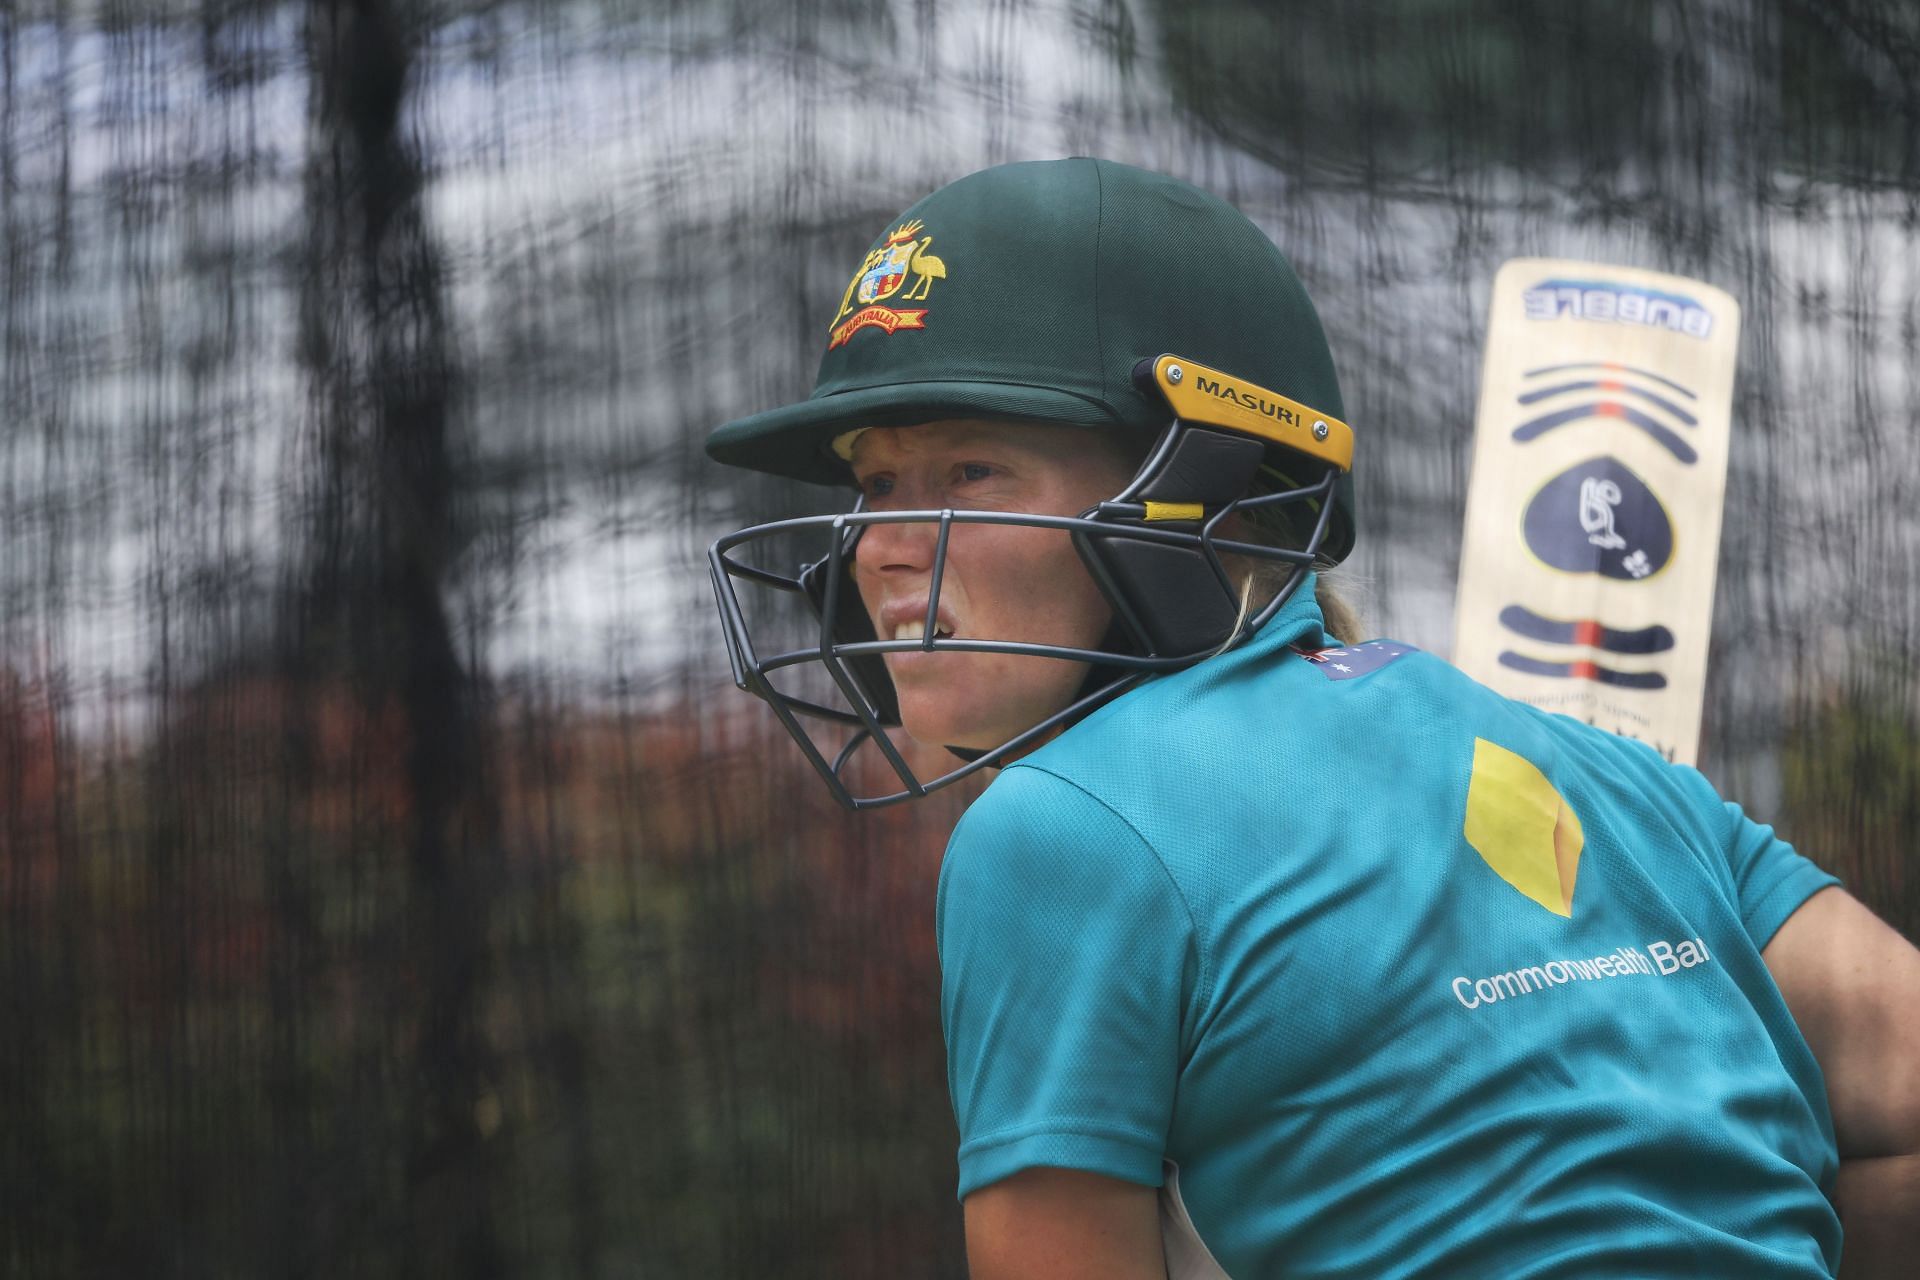 Alyssa Healy is arguably the best ODI batter in the world